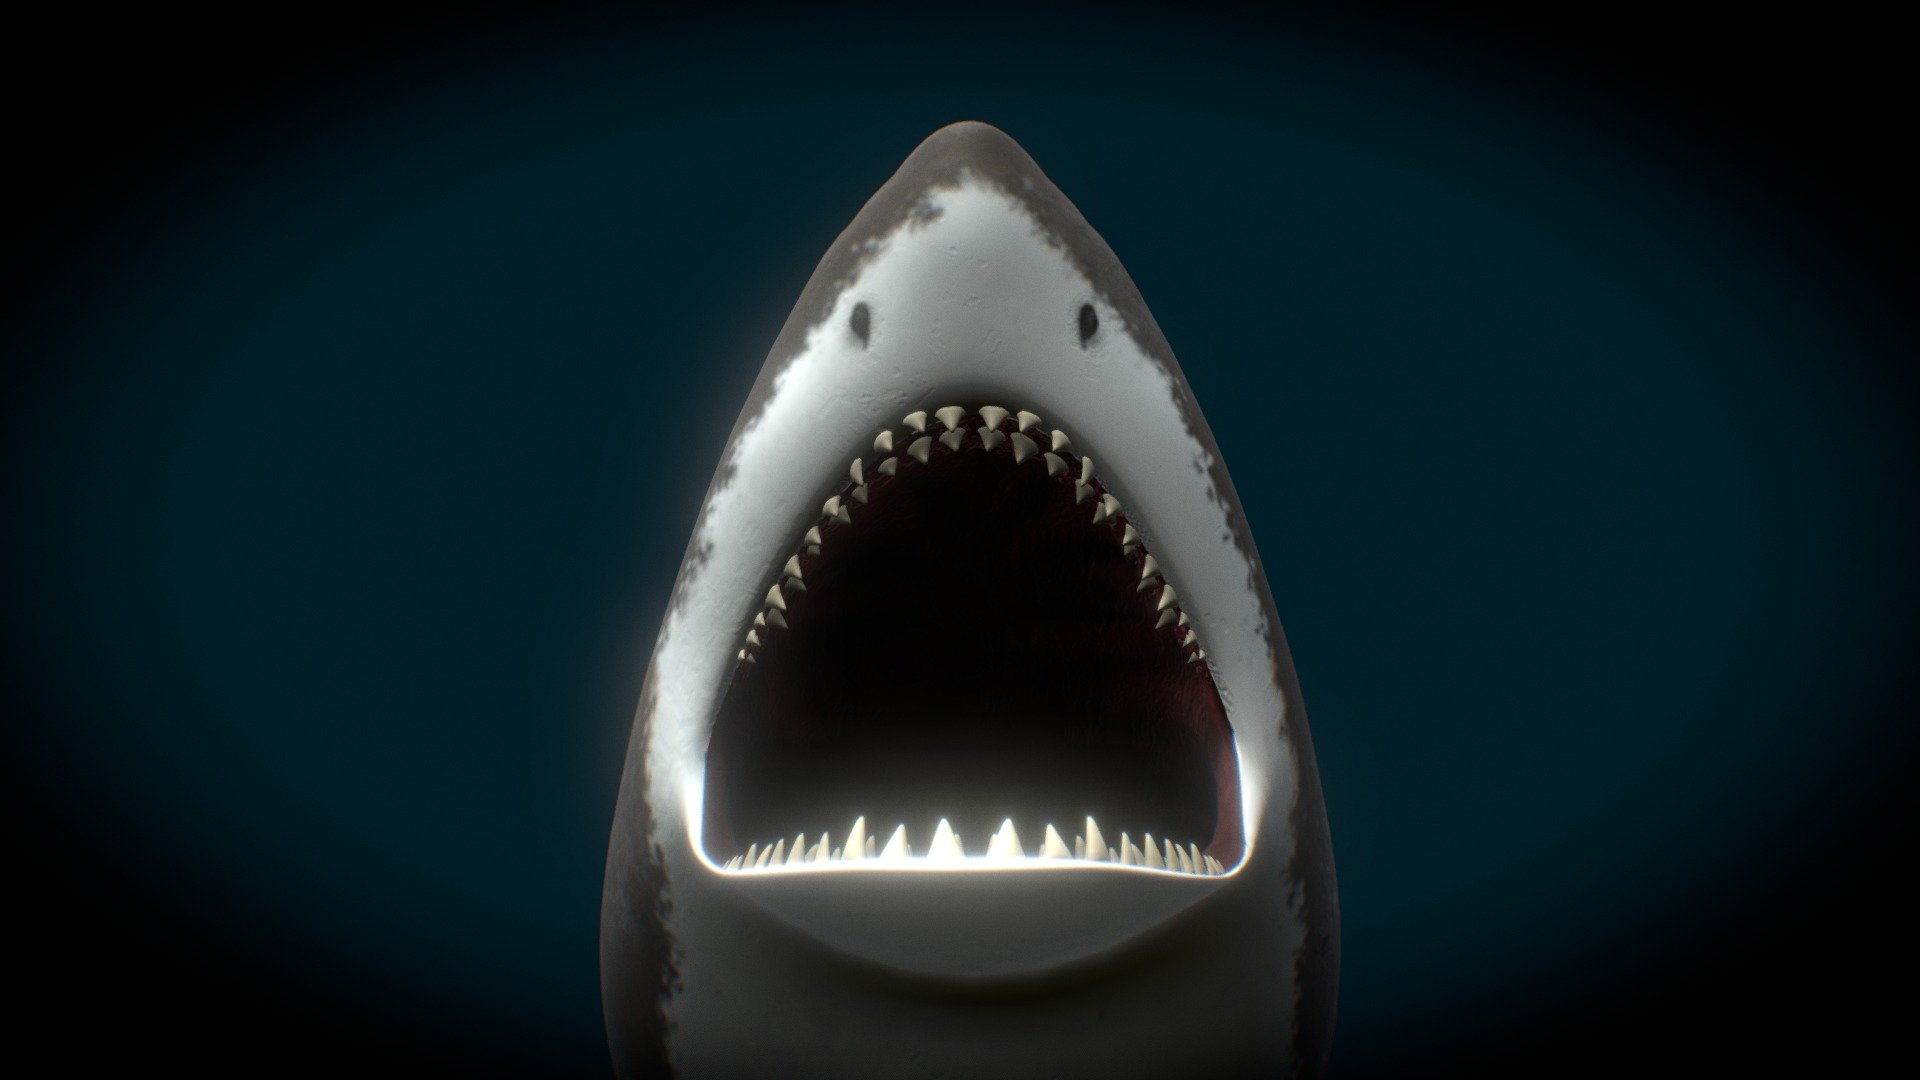 Shark modelled in Blender, painted in Substance Painter.

Free to download and use in your project 3d model